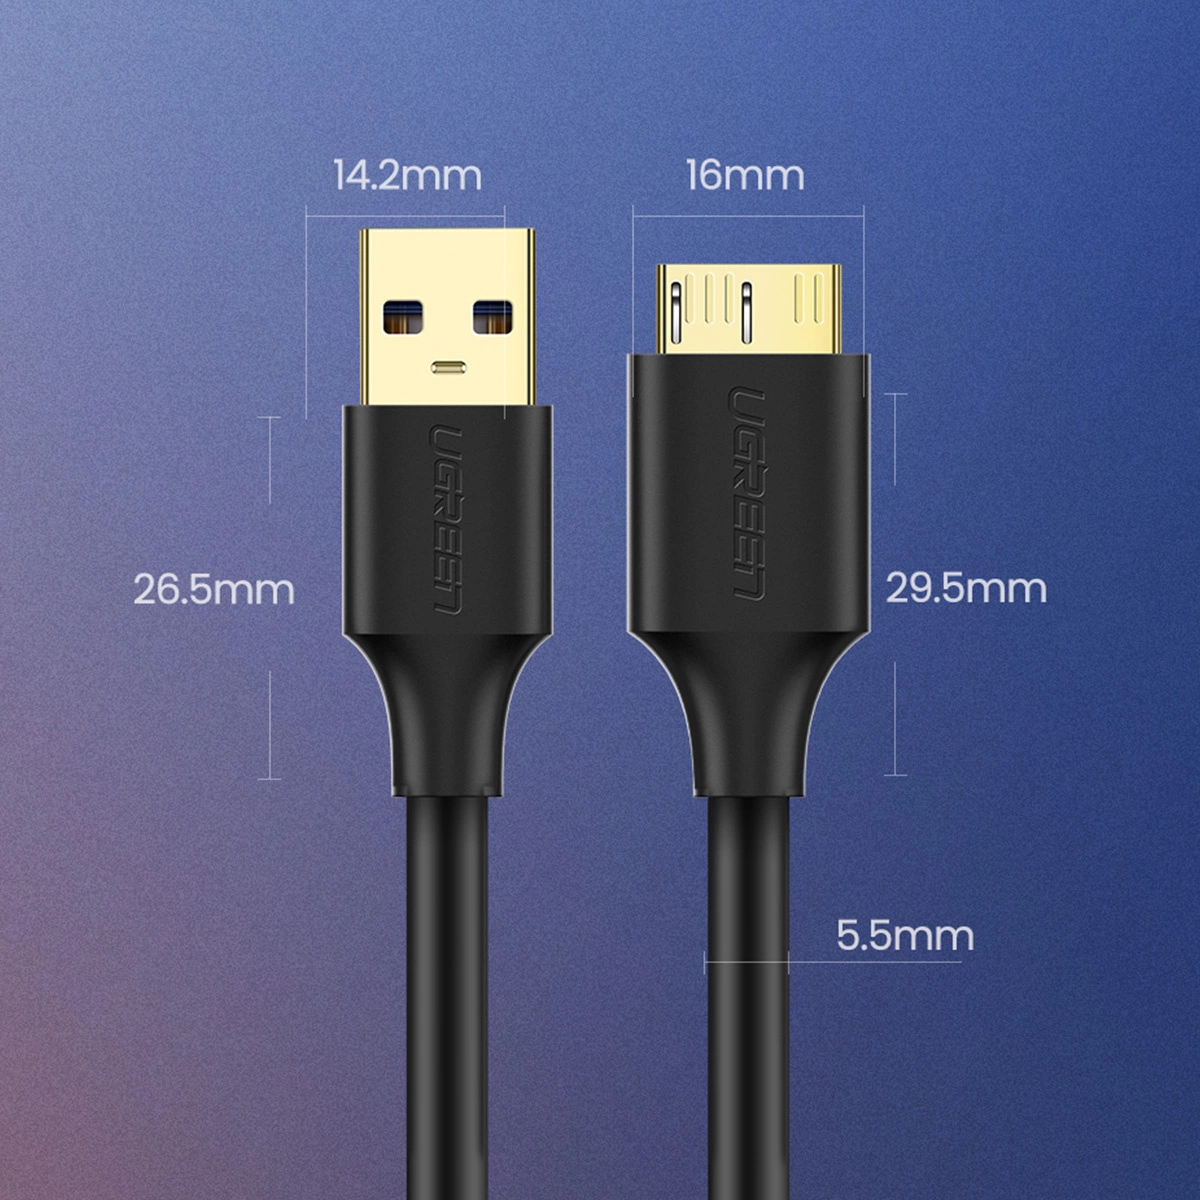 Ugreen US130 cable with dimensions